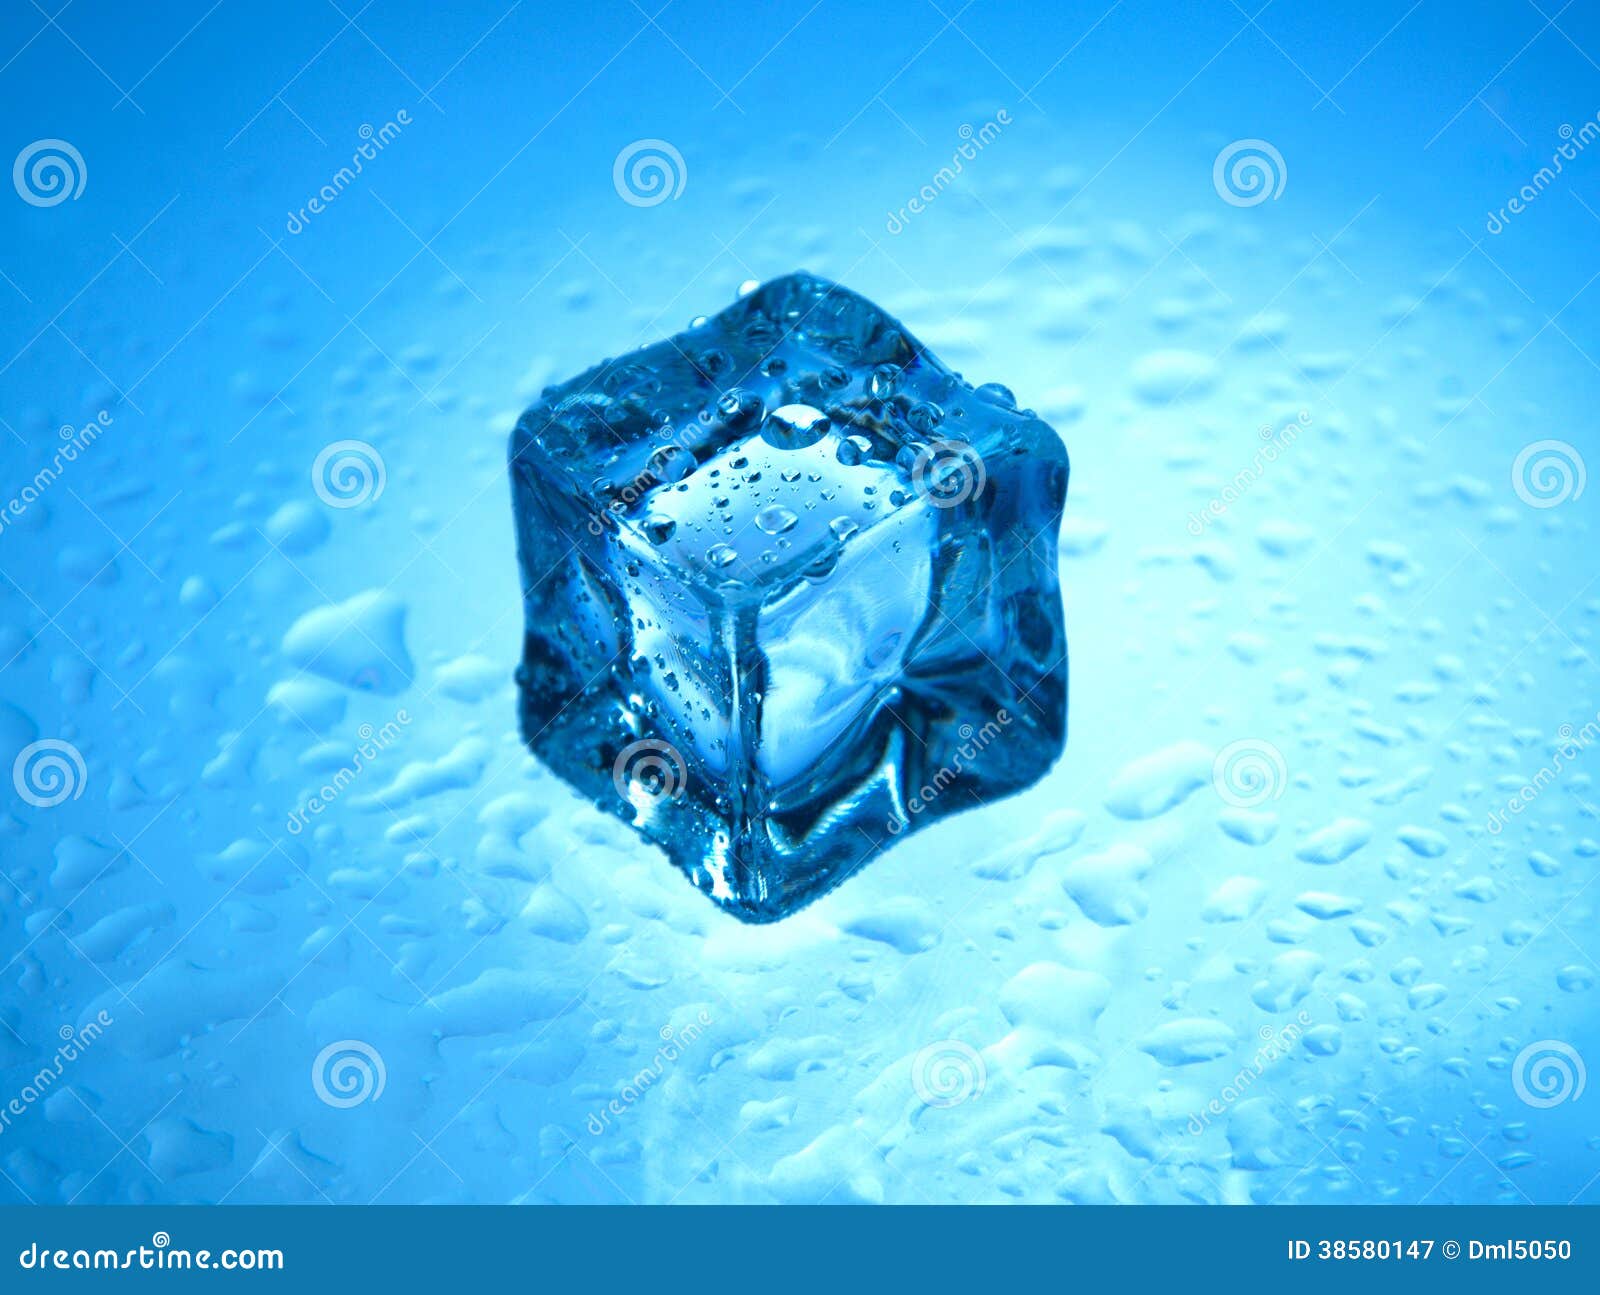 One Frozen Ice Cube with Clear Water Drops Stock Image - Image of melt,  closeup: 38580147